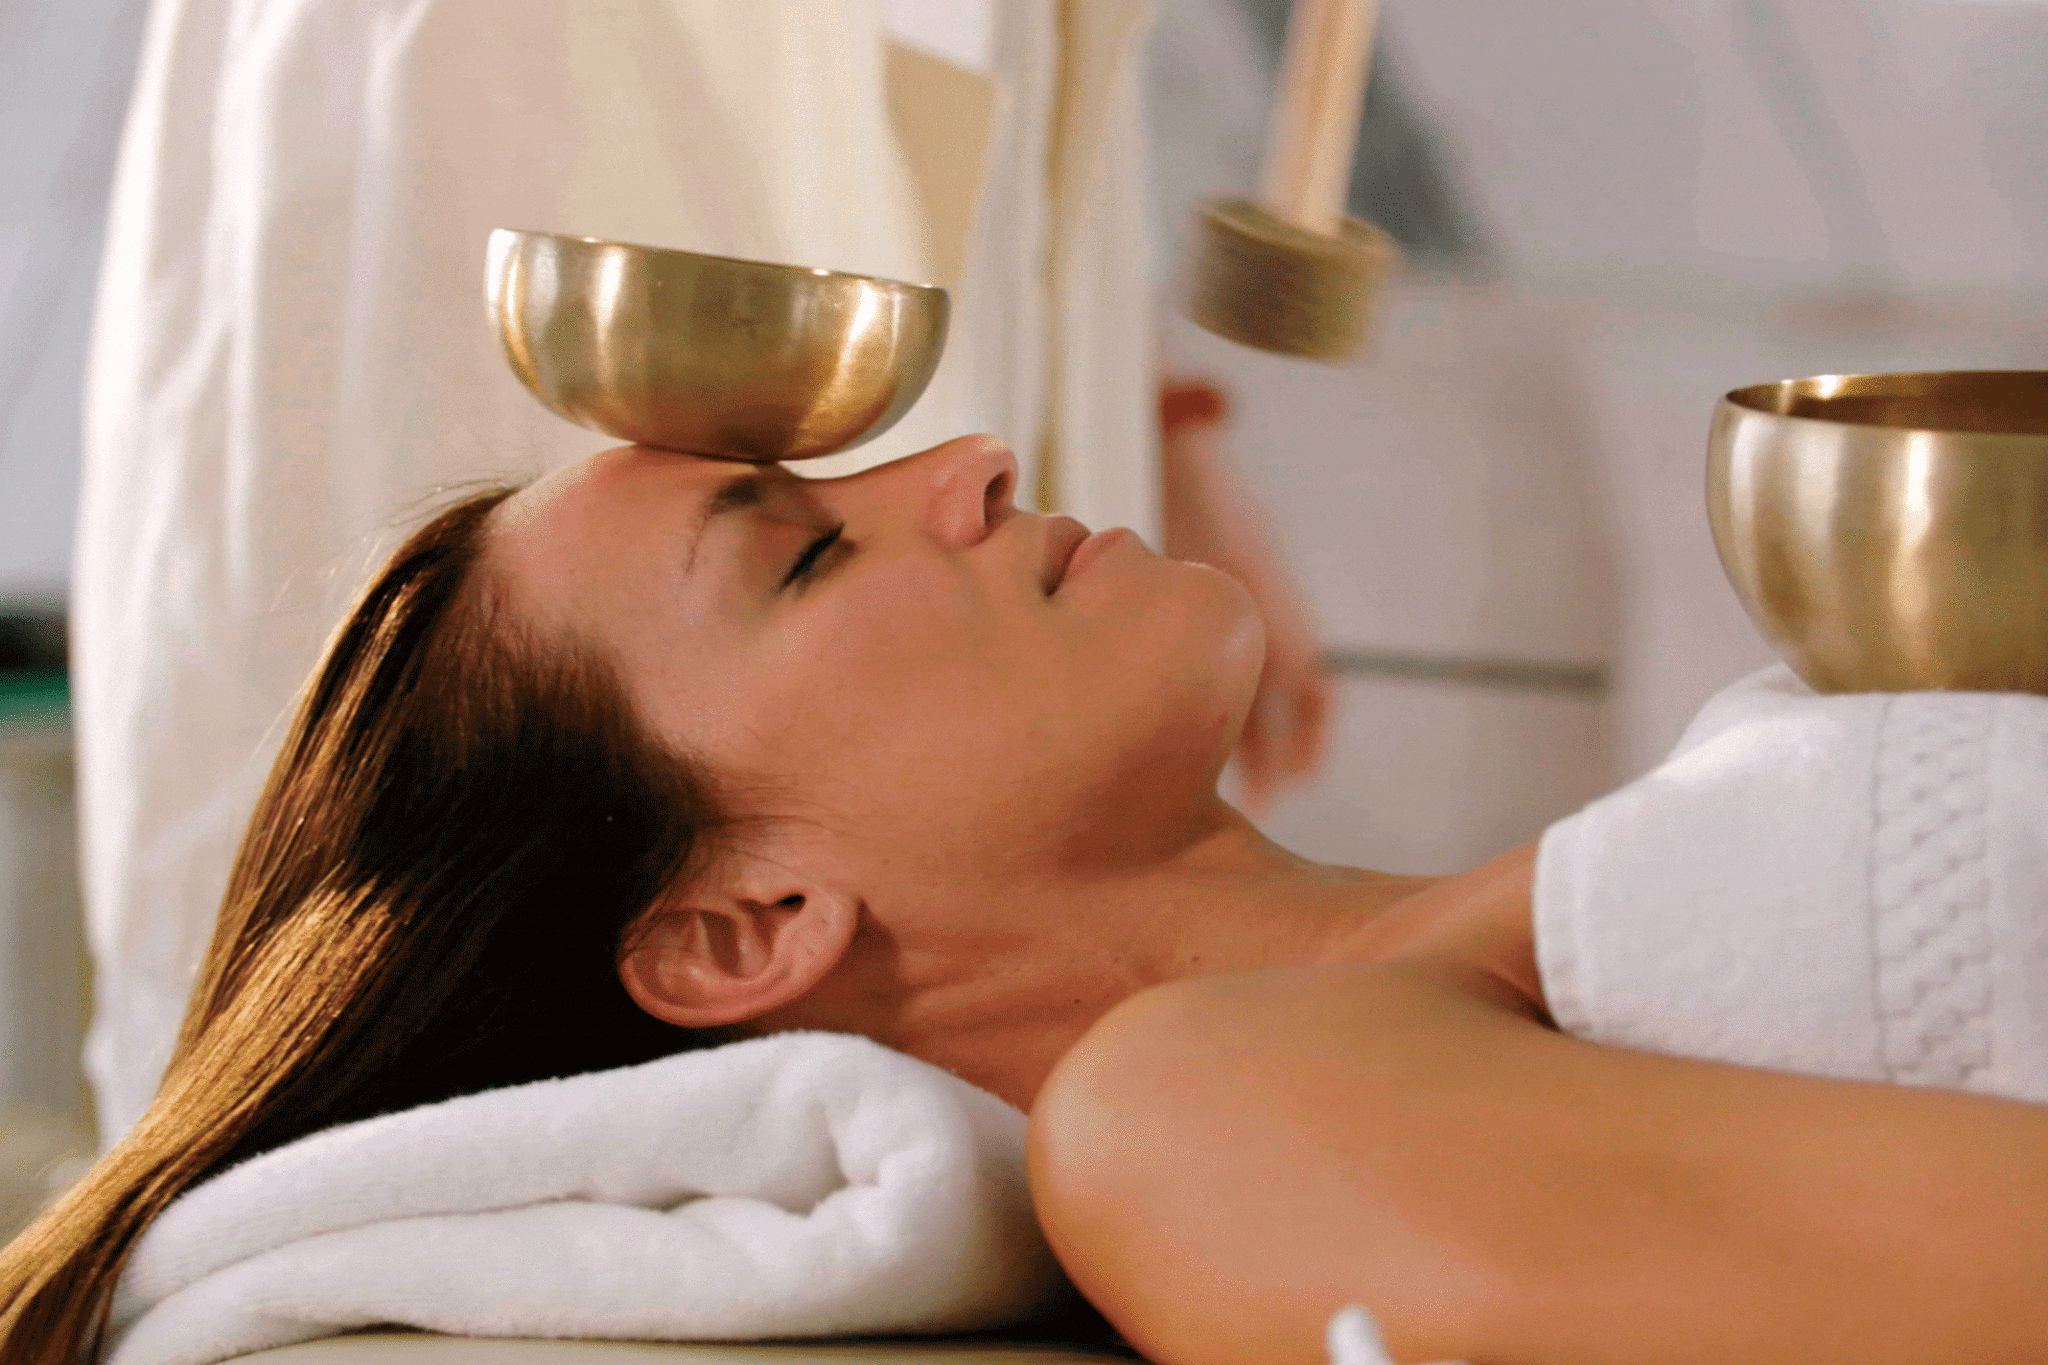 Bridal fitness: Luxurious day-spa treatments to try before your wedding day